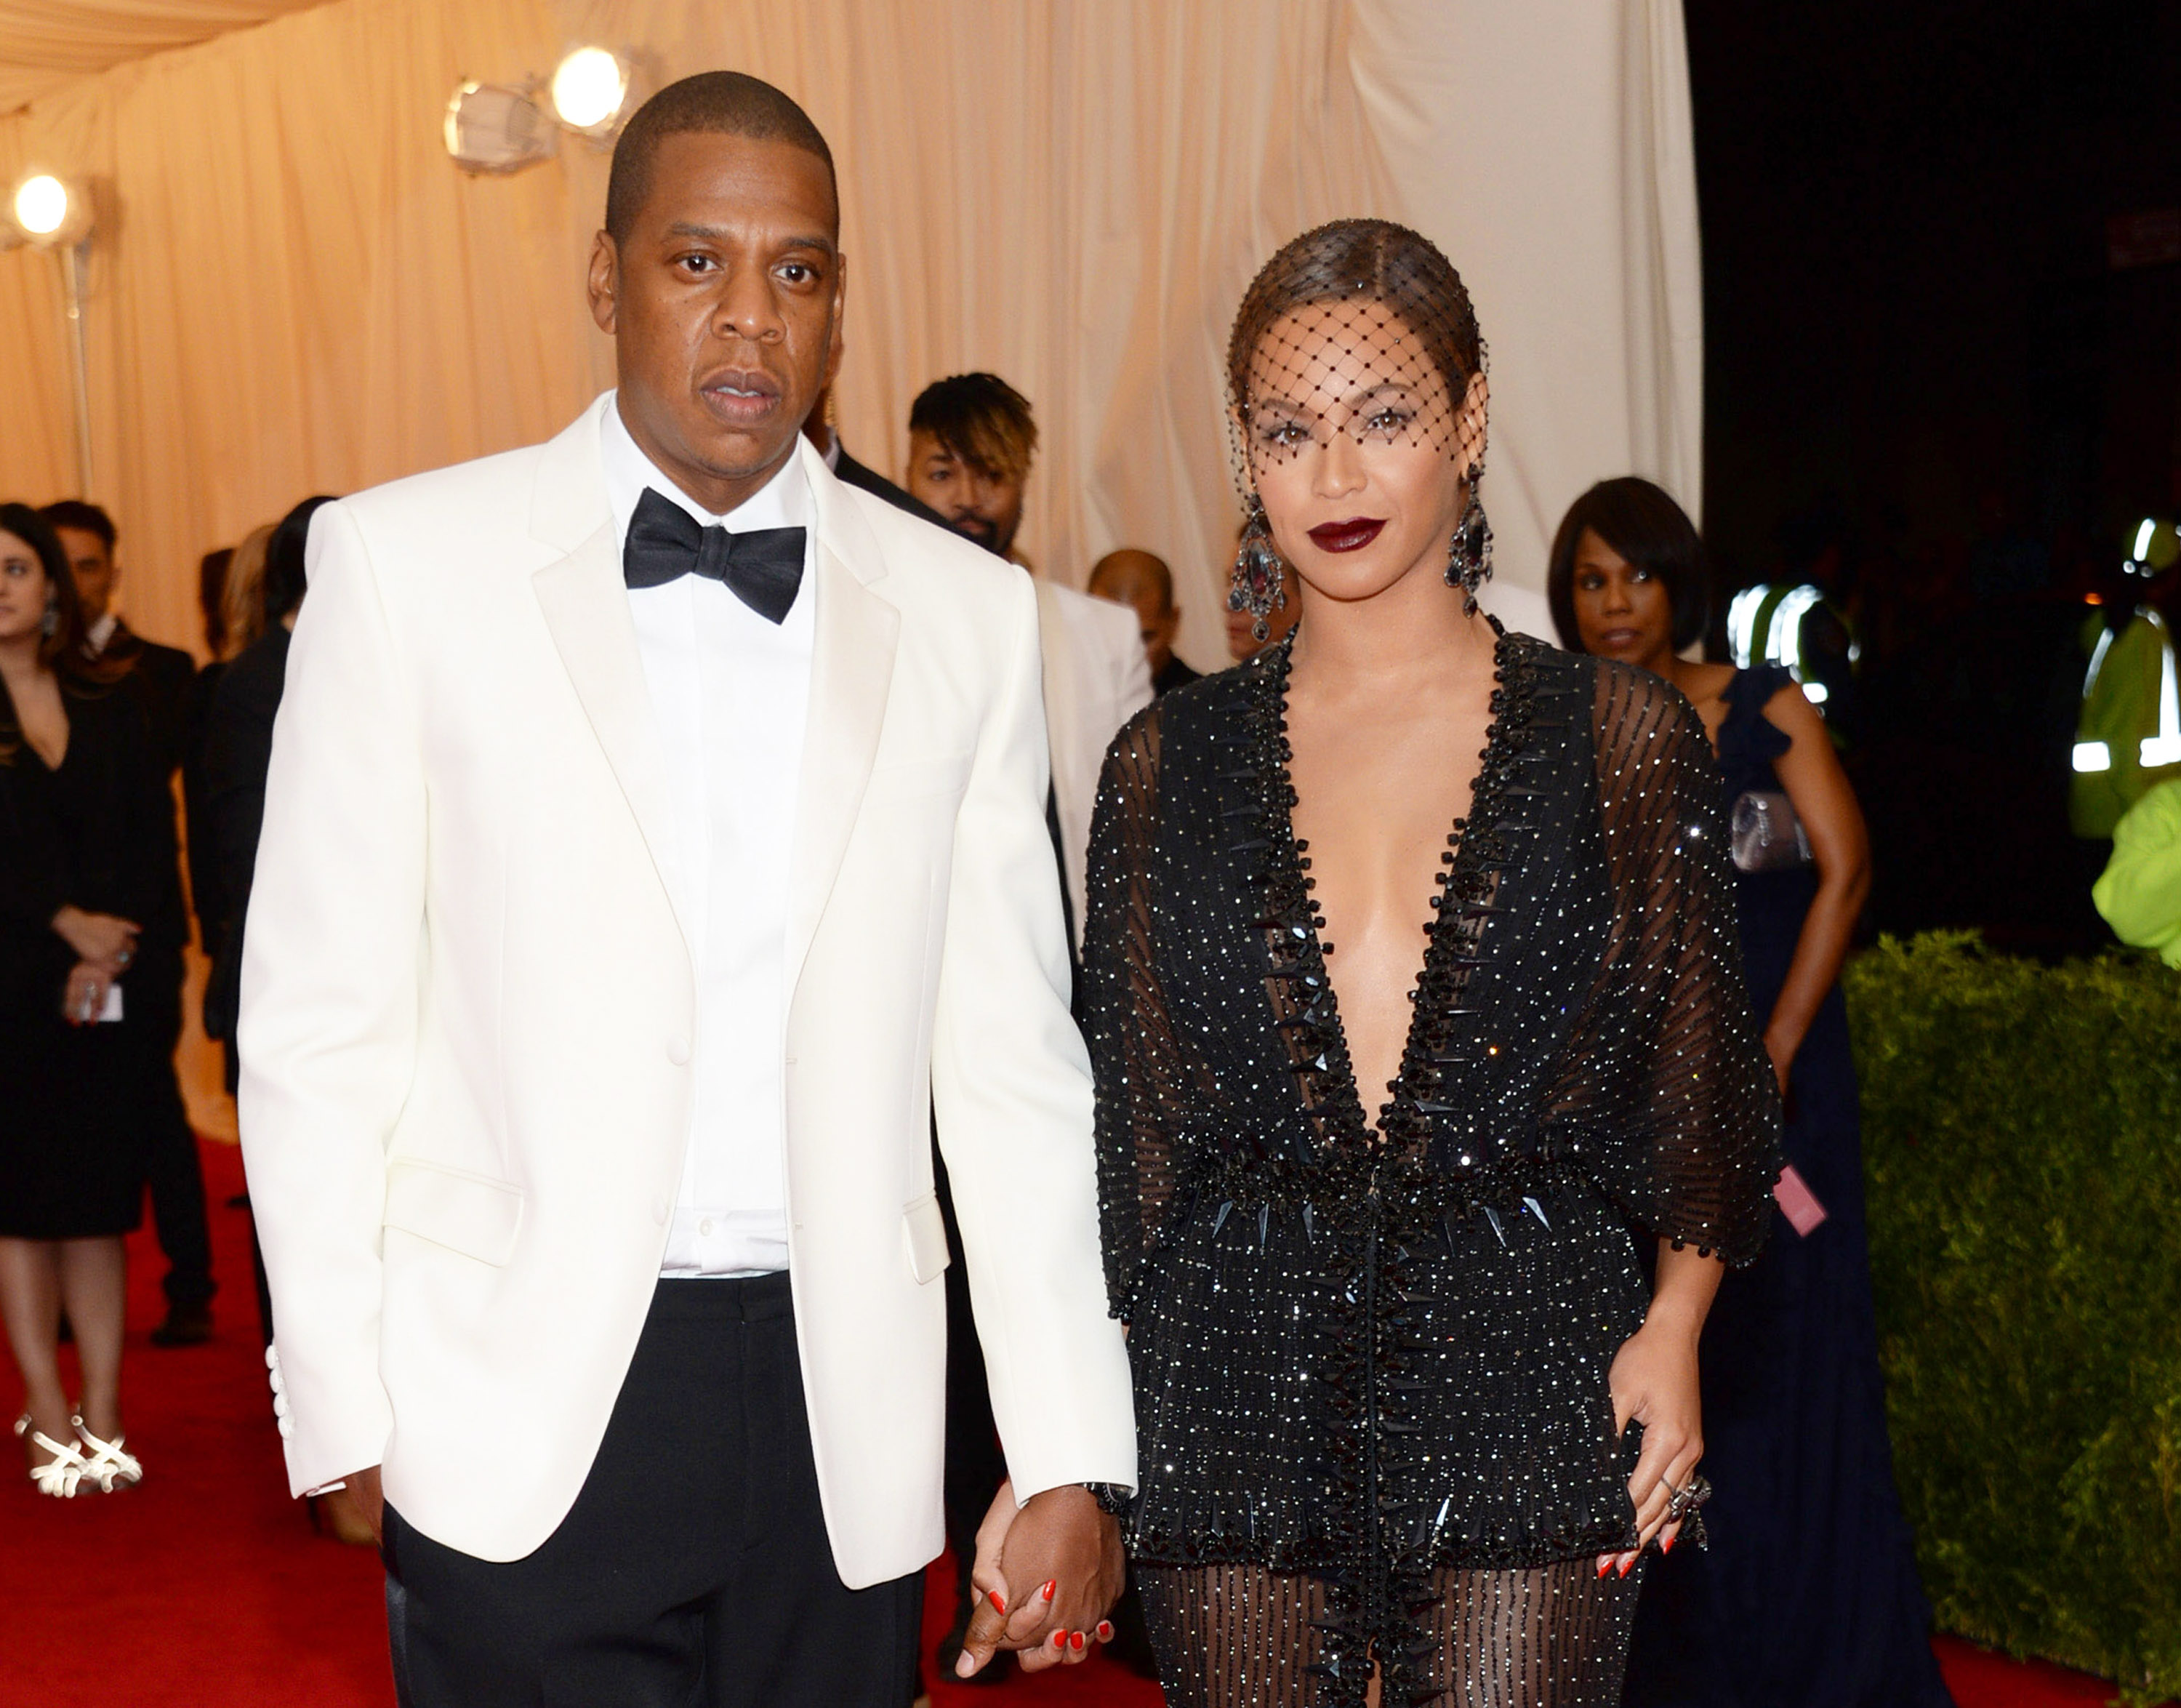 Jay Z and Beyonce at The Metropolitan Museum of Art's Costume Institute benefit gala. (Evan —Invision/AP)